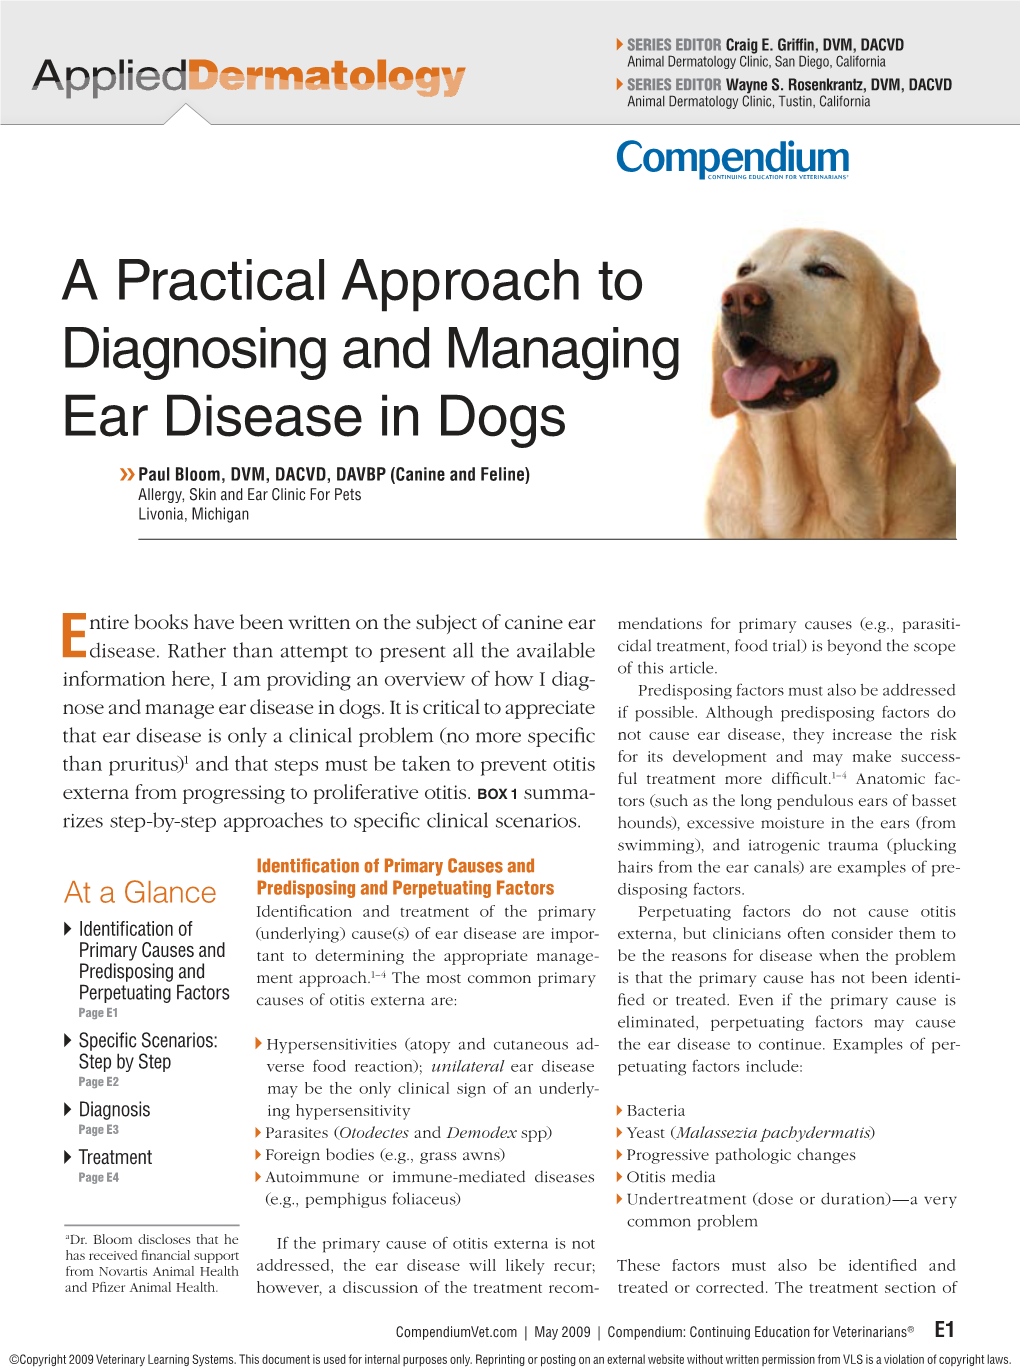 A Practical Approach to Diagnosing and Managing Ear Disease in Dogs